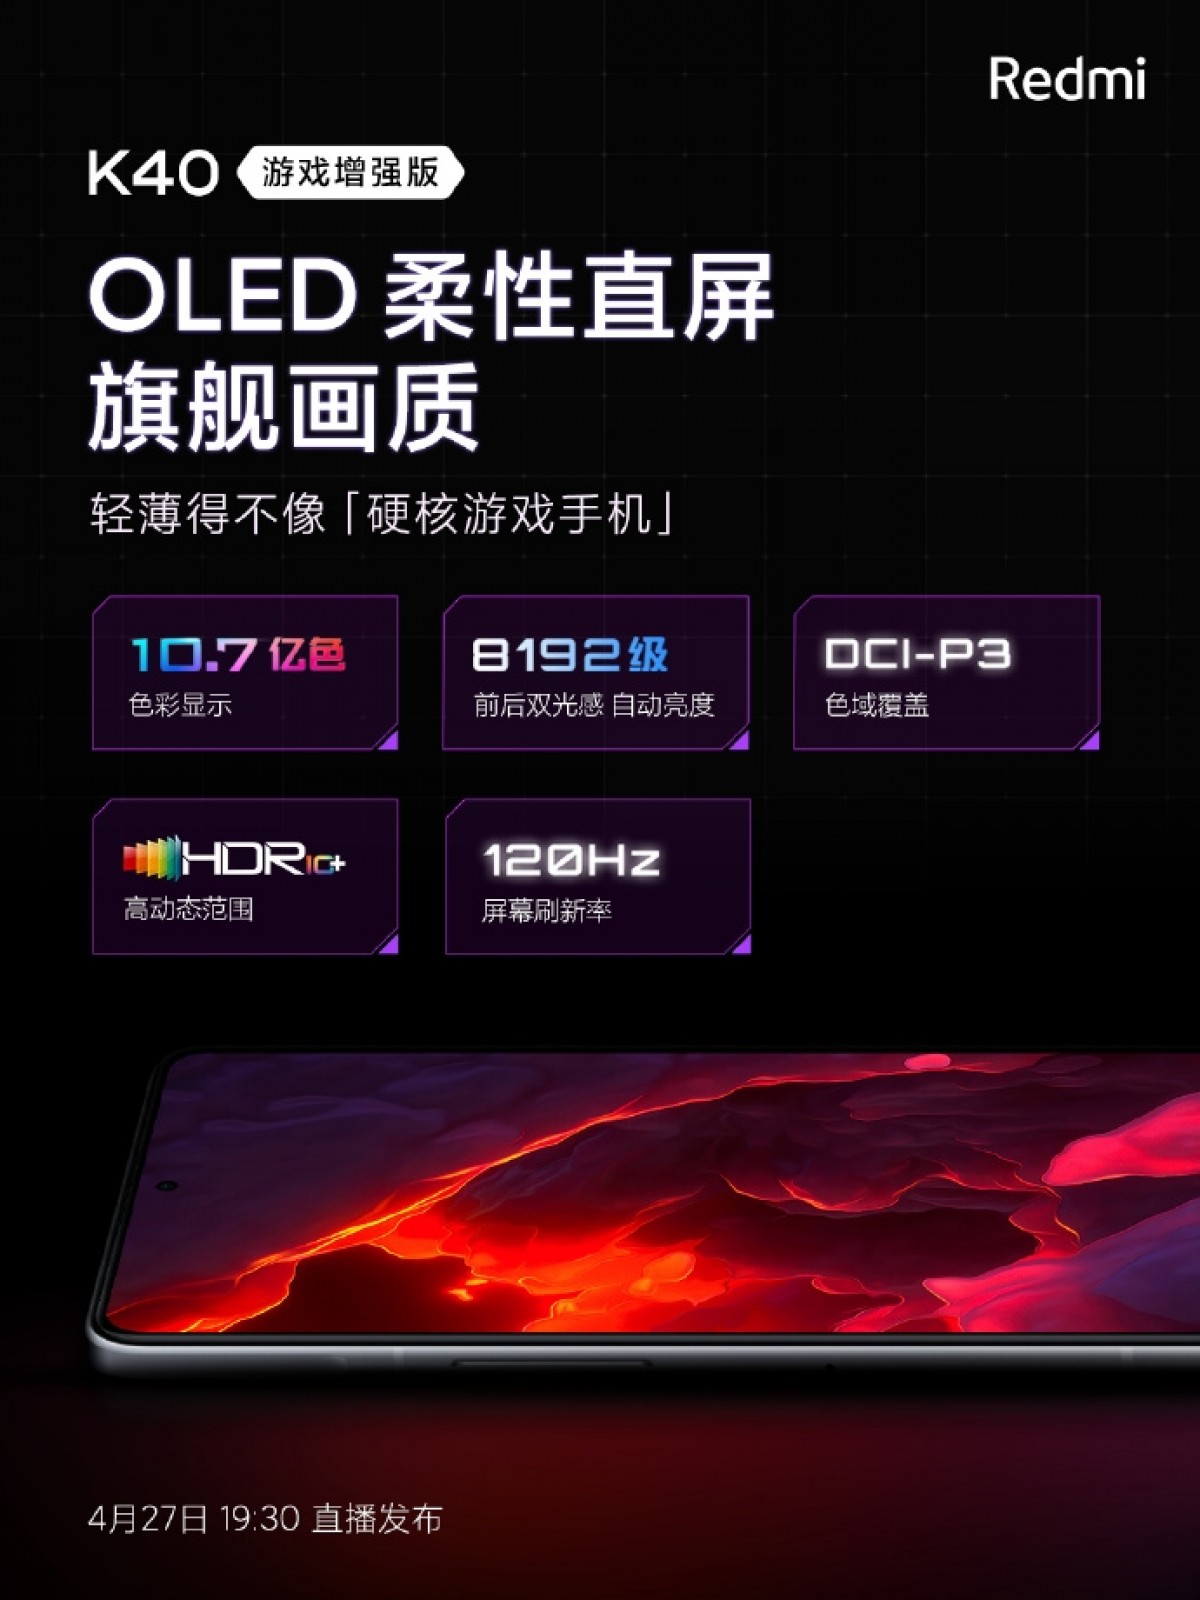 Redmi K40 Gaming to have trendy OLED with 120 Hz refresh rate